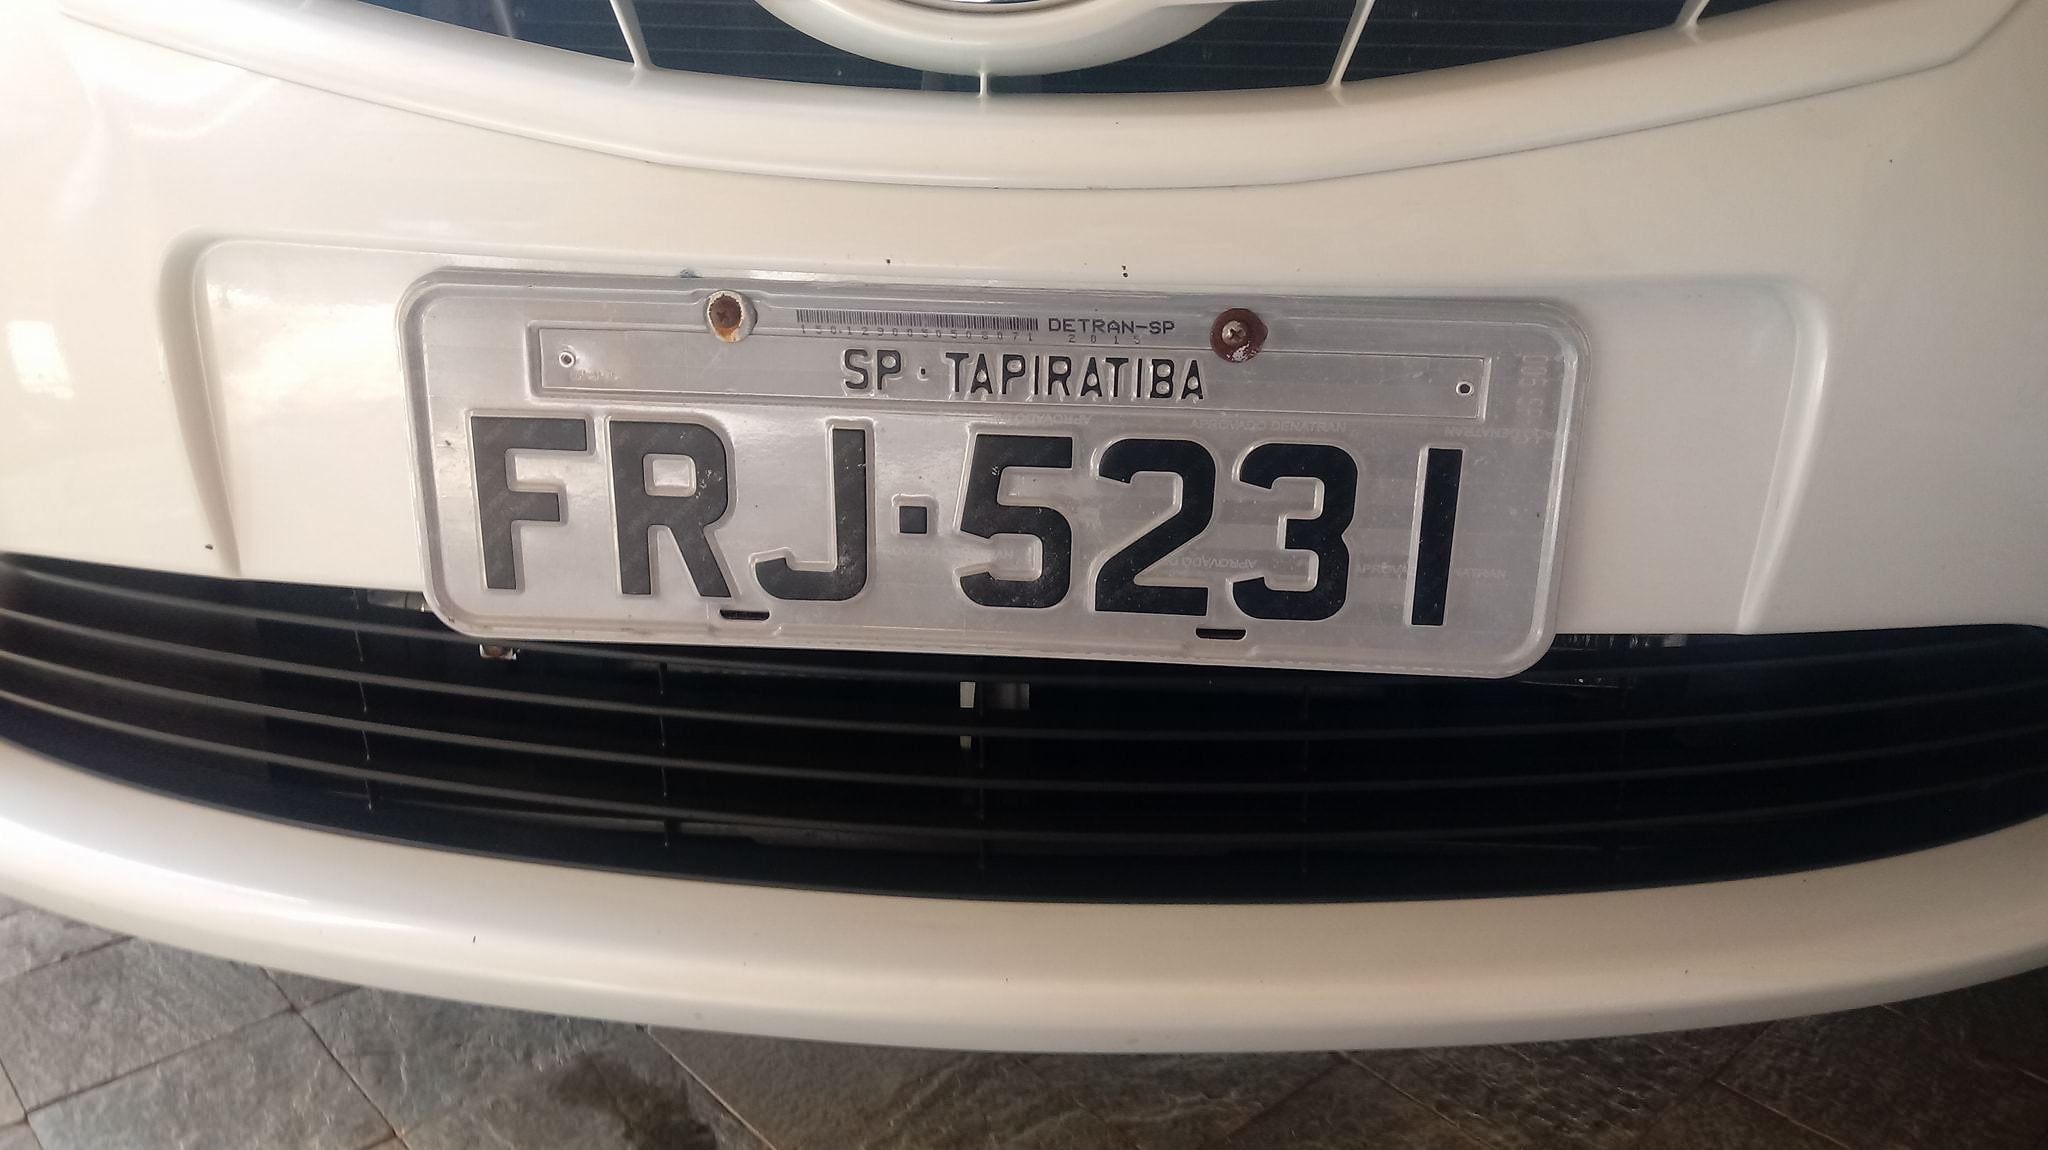 How are license plates in your region? : cars